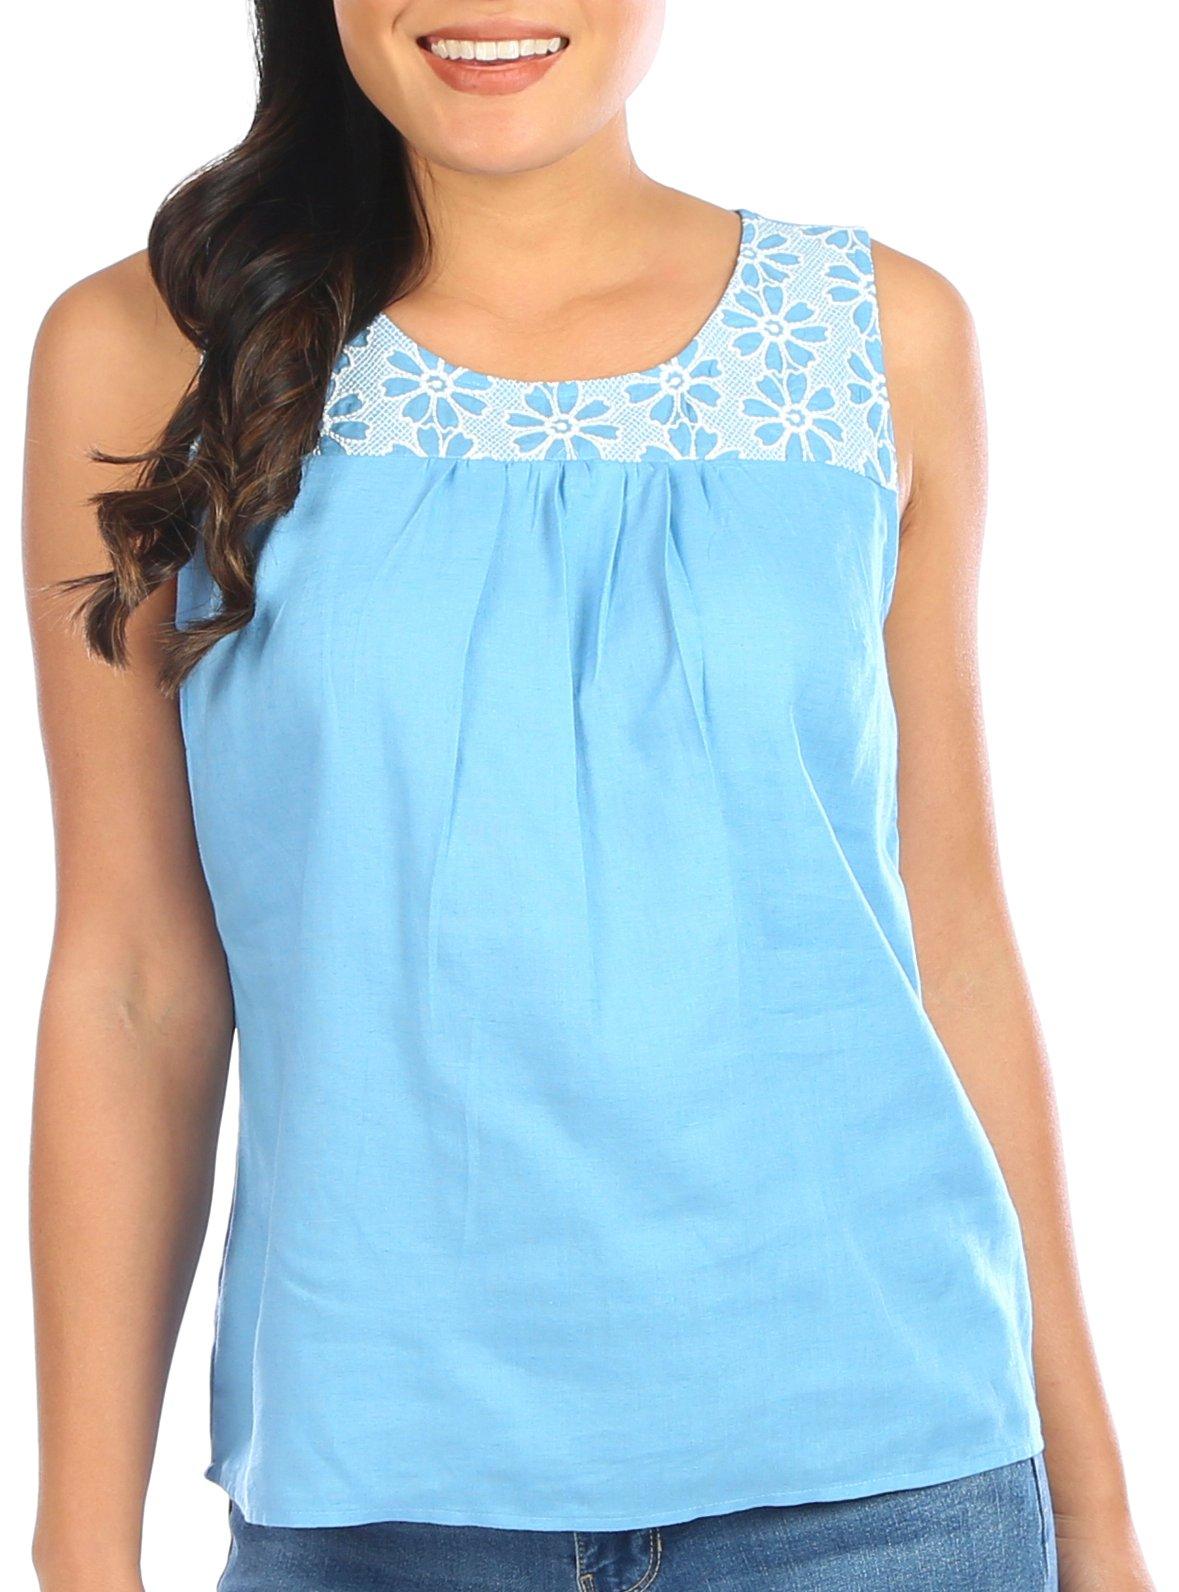 Coral Bay Petite Embellished Lace Sleeveless Top